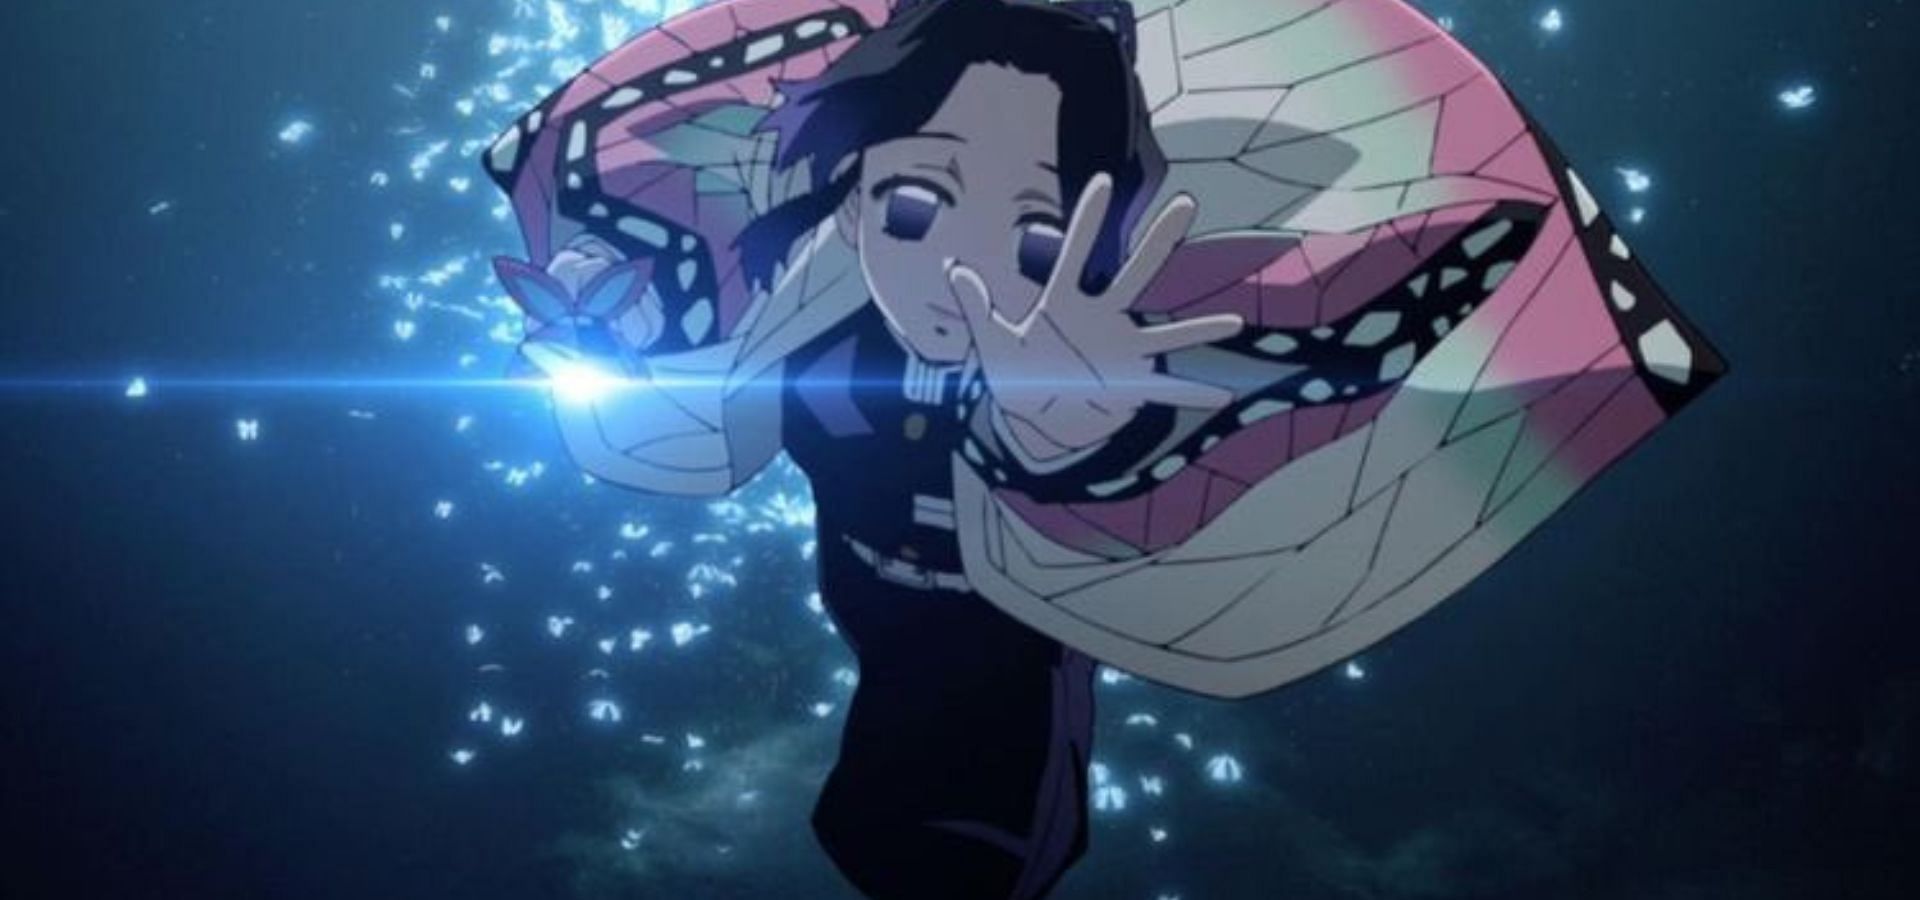 Insect Breathing (Image via Ufotable)